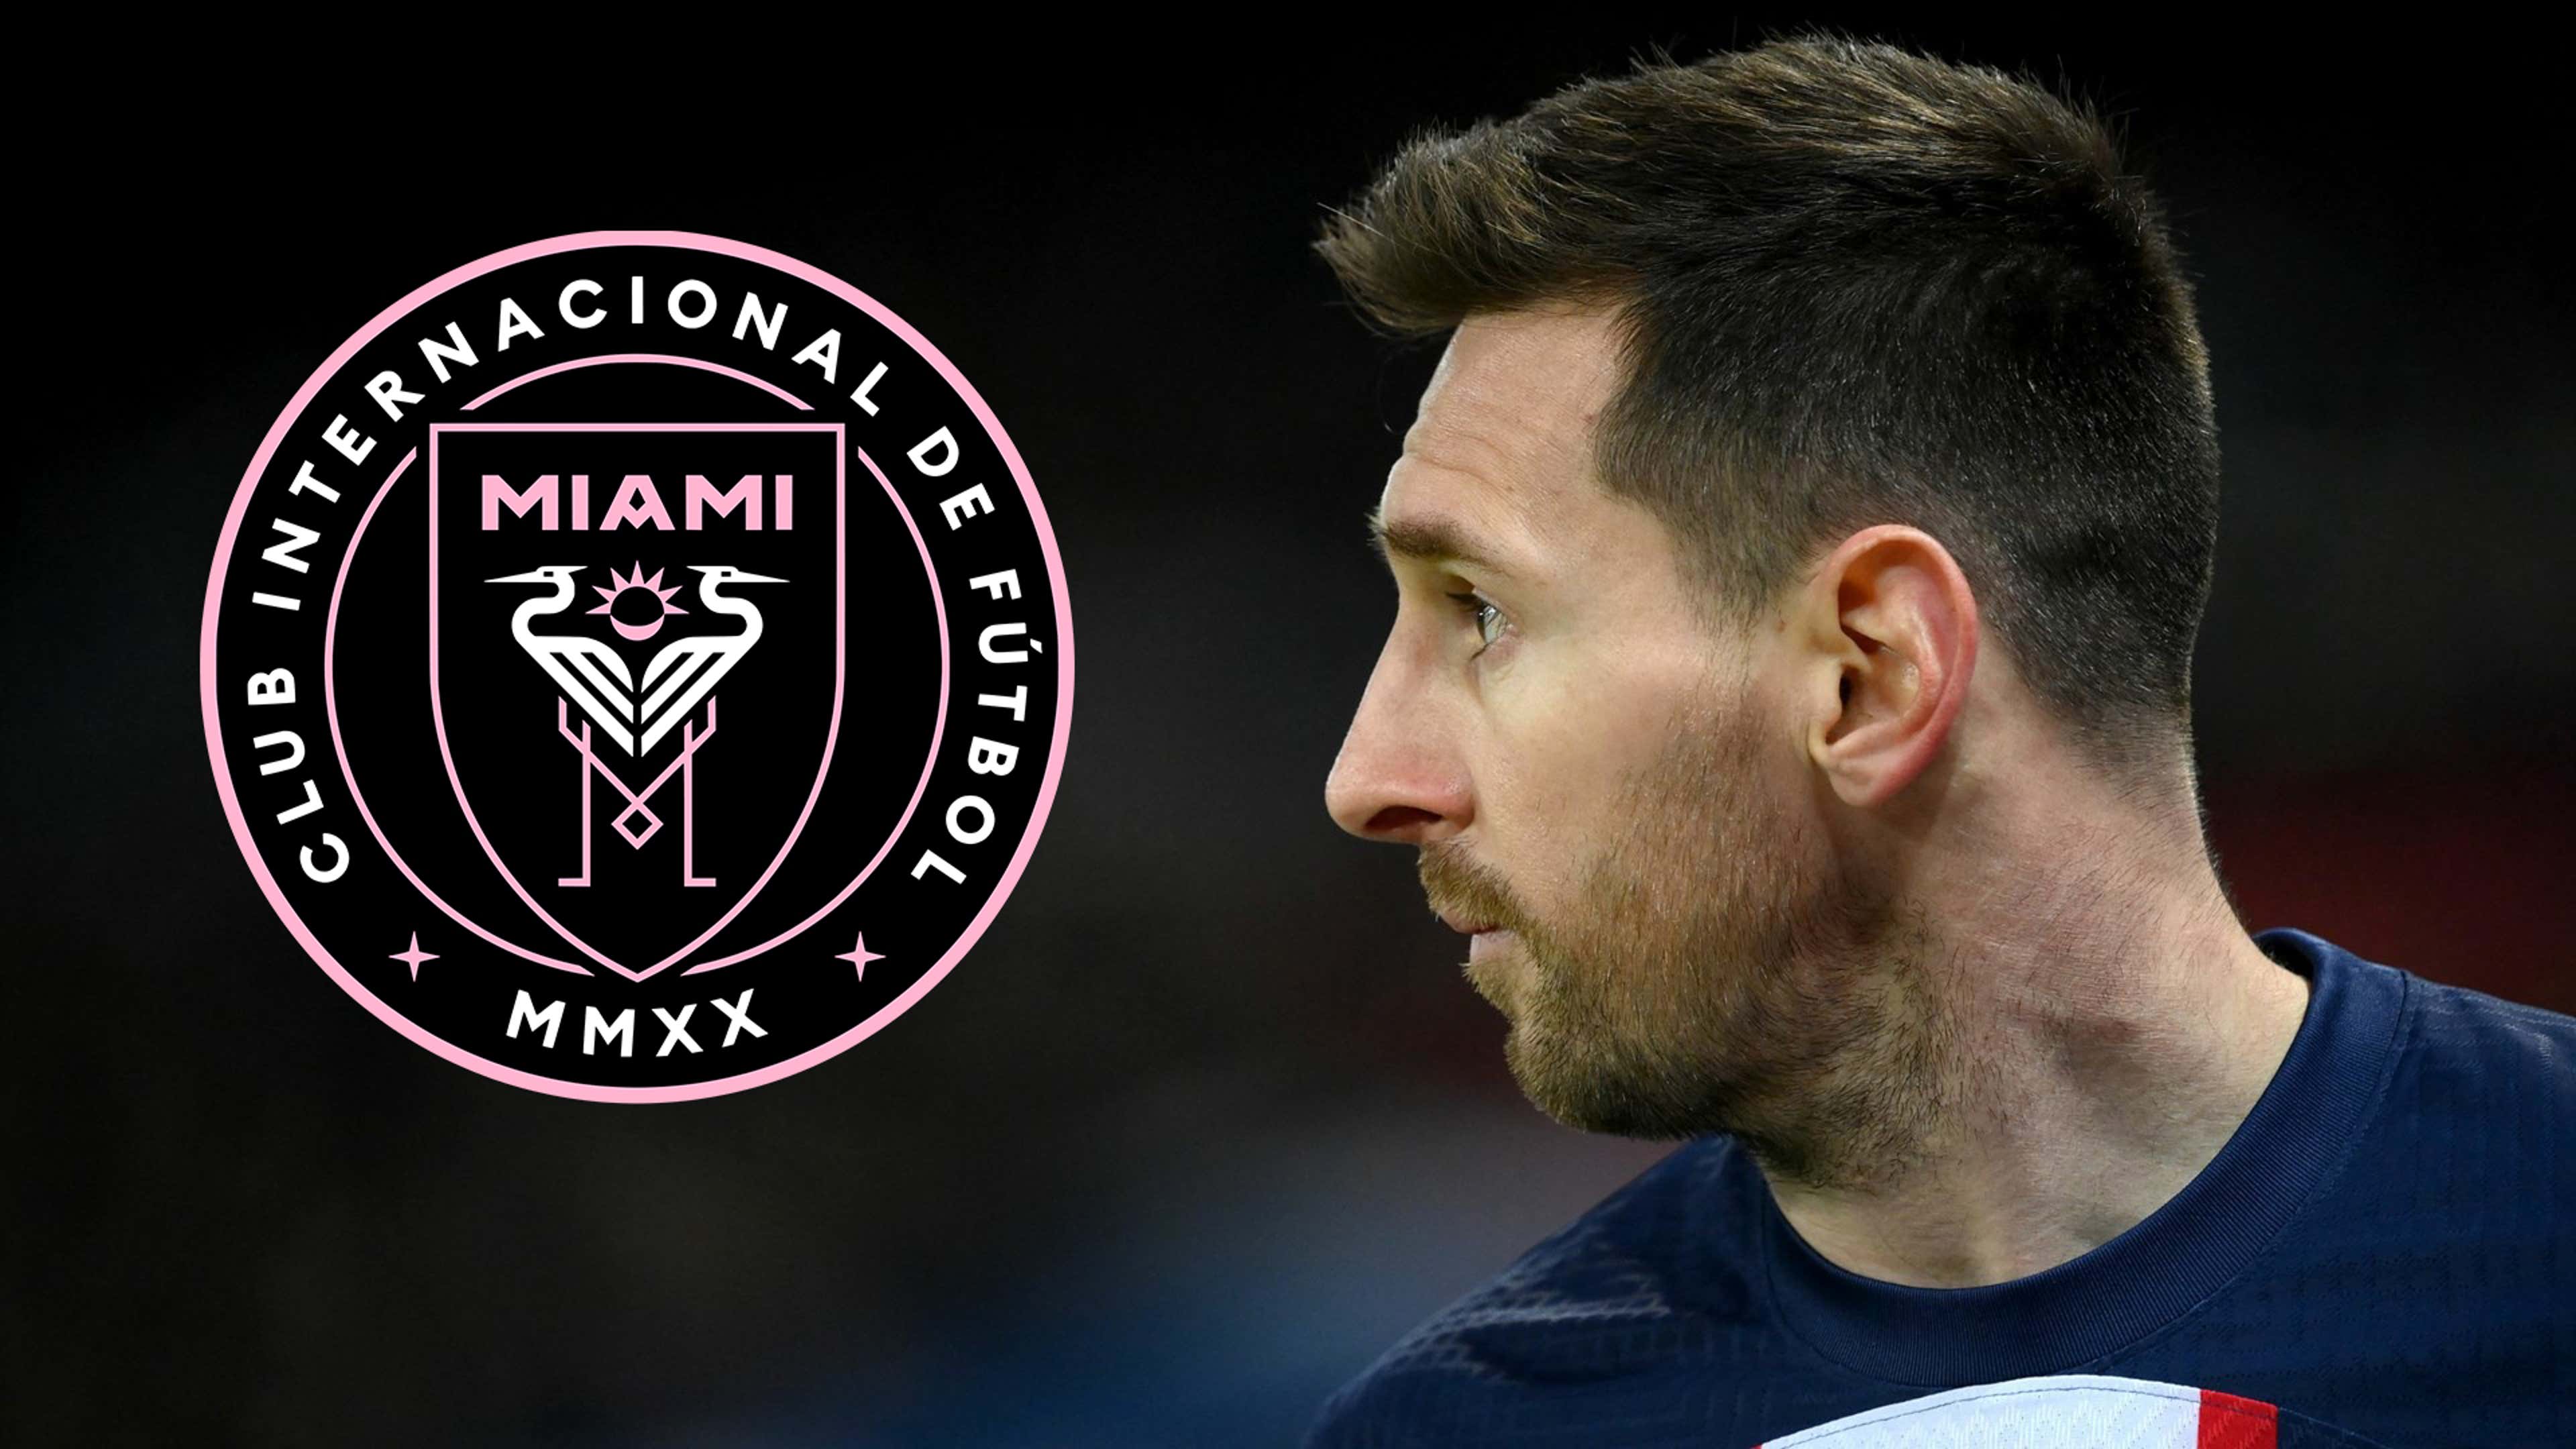 Lionel Messi is Inter Miami's transfer priority as owner Jorge Mas spends time with PSG star's entourage & $2.5 BILLION MLS broadcast deal could help fund move | Goal.com US